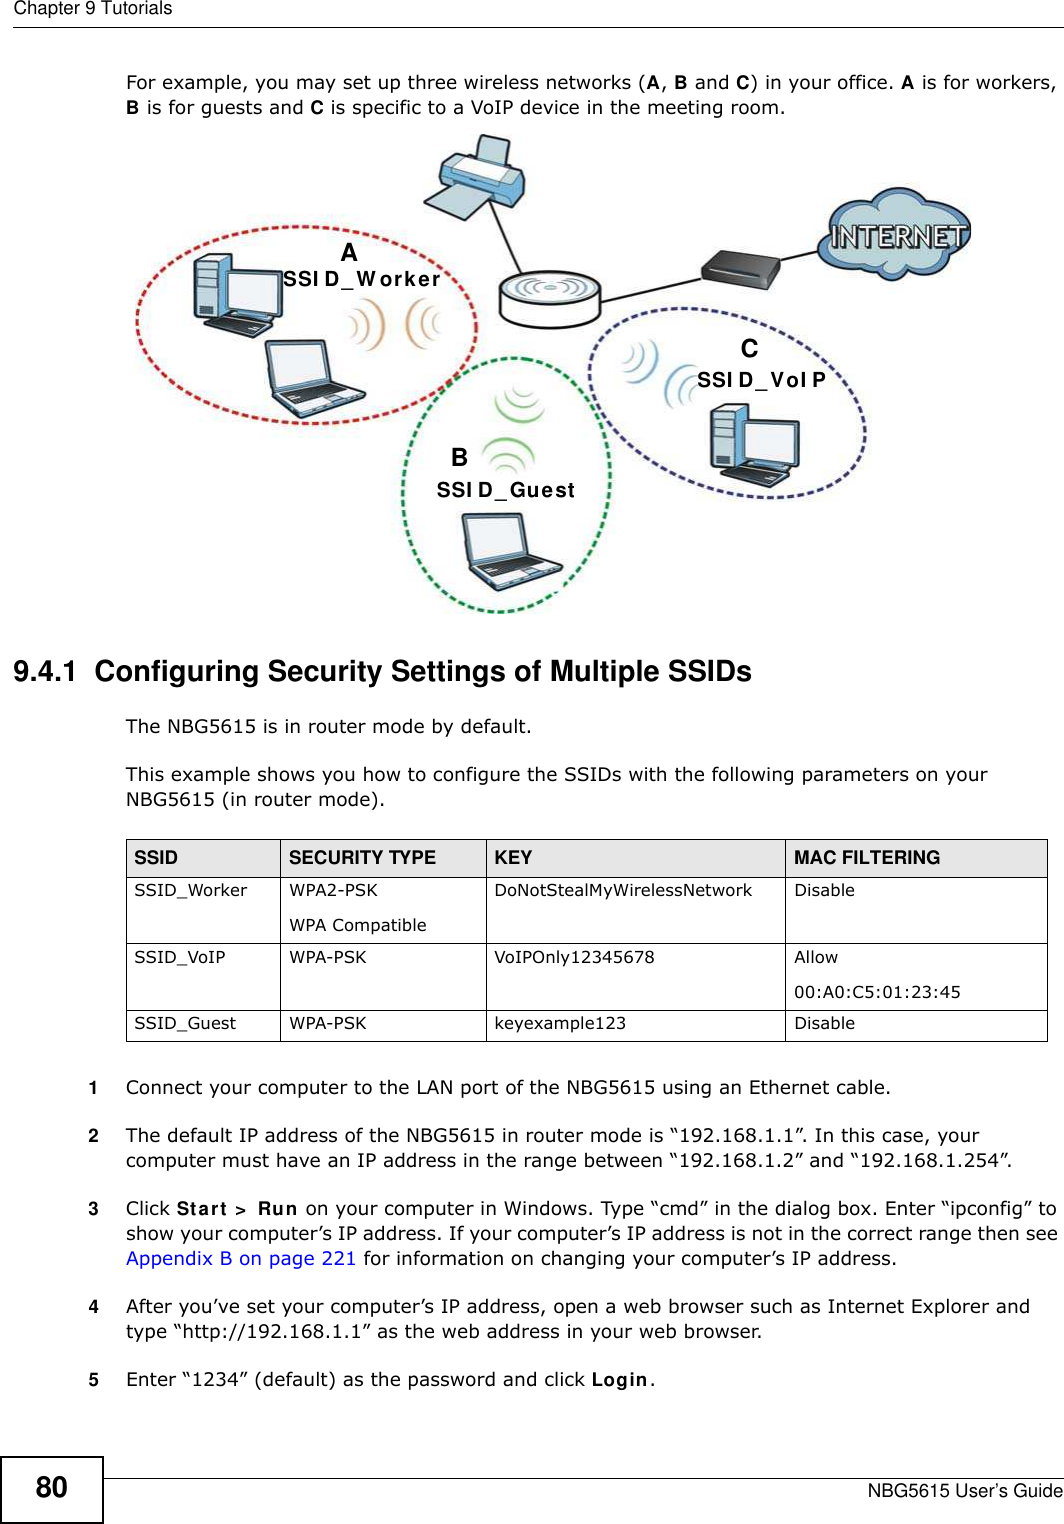 Chapter 9 TutorialsNBG5615 User’s Guide80For example, you may set up three wireless networks (A, B and C) in your office. A is for workers, B is for guests and C is specific to a VoIP device in the meeting room. 9.4.1  Configuring Security Settings of Multiple SSIDsThe NBG5615 is in router mode by default.This example shows you how to configure the SSIDs with the following parameters on your NBG5615 (in router mode).1Connect your computer to the LAN port of the NBG5615 using an Ethernet cable. 2The default IP address of the NBG5615 in router mode is “192.168.1.1”. In this case, your computer must have an IP address in the range between “192.168.1.2” and “192.168.1.254”.3Click Start &gt;  Run on your computer in Windows. Type “cmd” in the dialog box. Enter “ipconfig” to show your computer’s IP address. If your computer’s IP address is not in the correct range then see Appendix B on page 221 for information on changing your computer’s IP address.4After you’ve set your computer’s IP address, open a web browser such as Internet Explorer and type “http://192.168.1.1” as the web address in your web browser.5Enter “1234” (default) as the password and click Login.ABCSSI D_GuestSSI D_ W orkerSSI D_VoI PSSID SECURITY TYPE KEY MAC FILTERINGSSID_Worker WPA2-PSKWPA Compatible DoNotStealMyWirelessNetwork DisableSSID_VoIP WPA-PSK VoIPOnly12345678 Allow00:A0:C5:01:23:45SSID_Guest WPA-PSK keyexample123 Disable